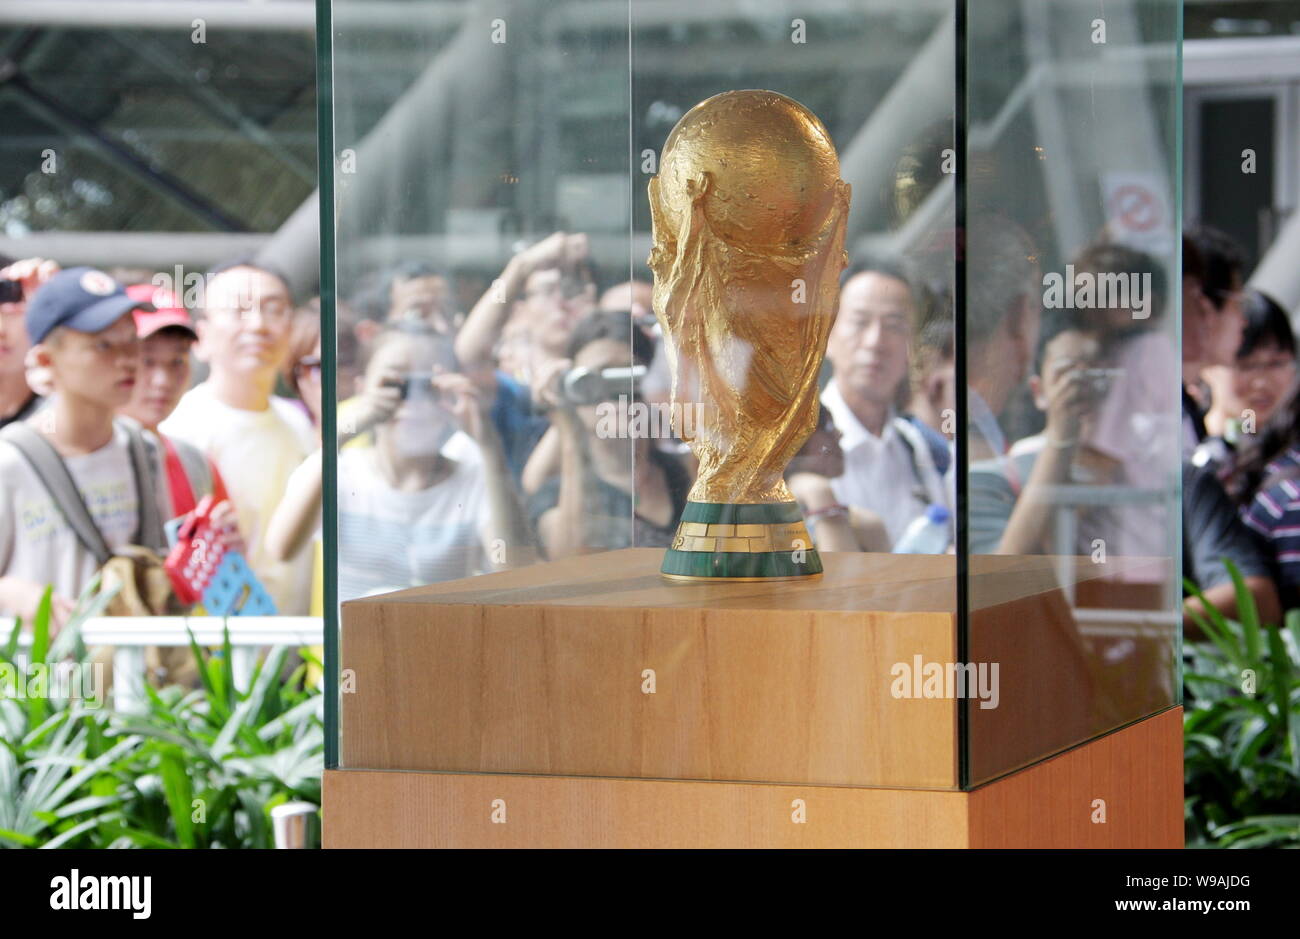 Visitors look at the FIFA World Cup Trophy (or Jules Rimet Cup) at the Spain Pavilion in the World Expo Park in Shanghai, China, 30 August 2010.   The Stock Photo